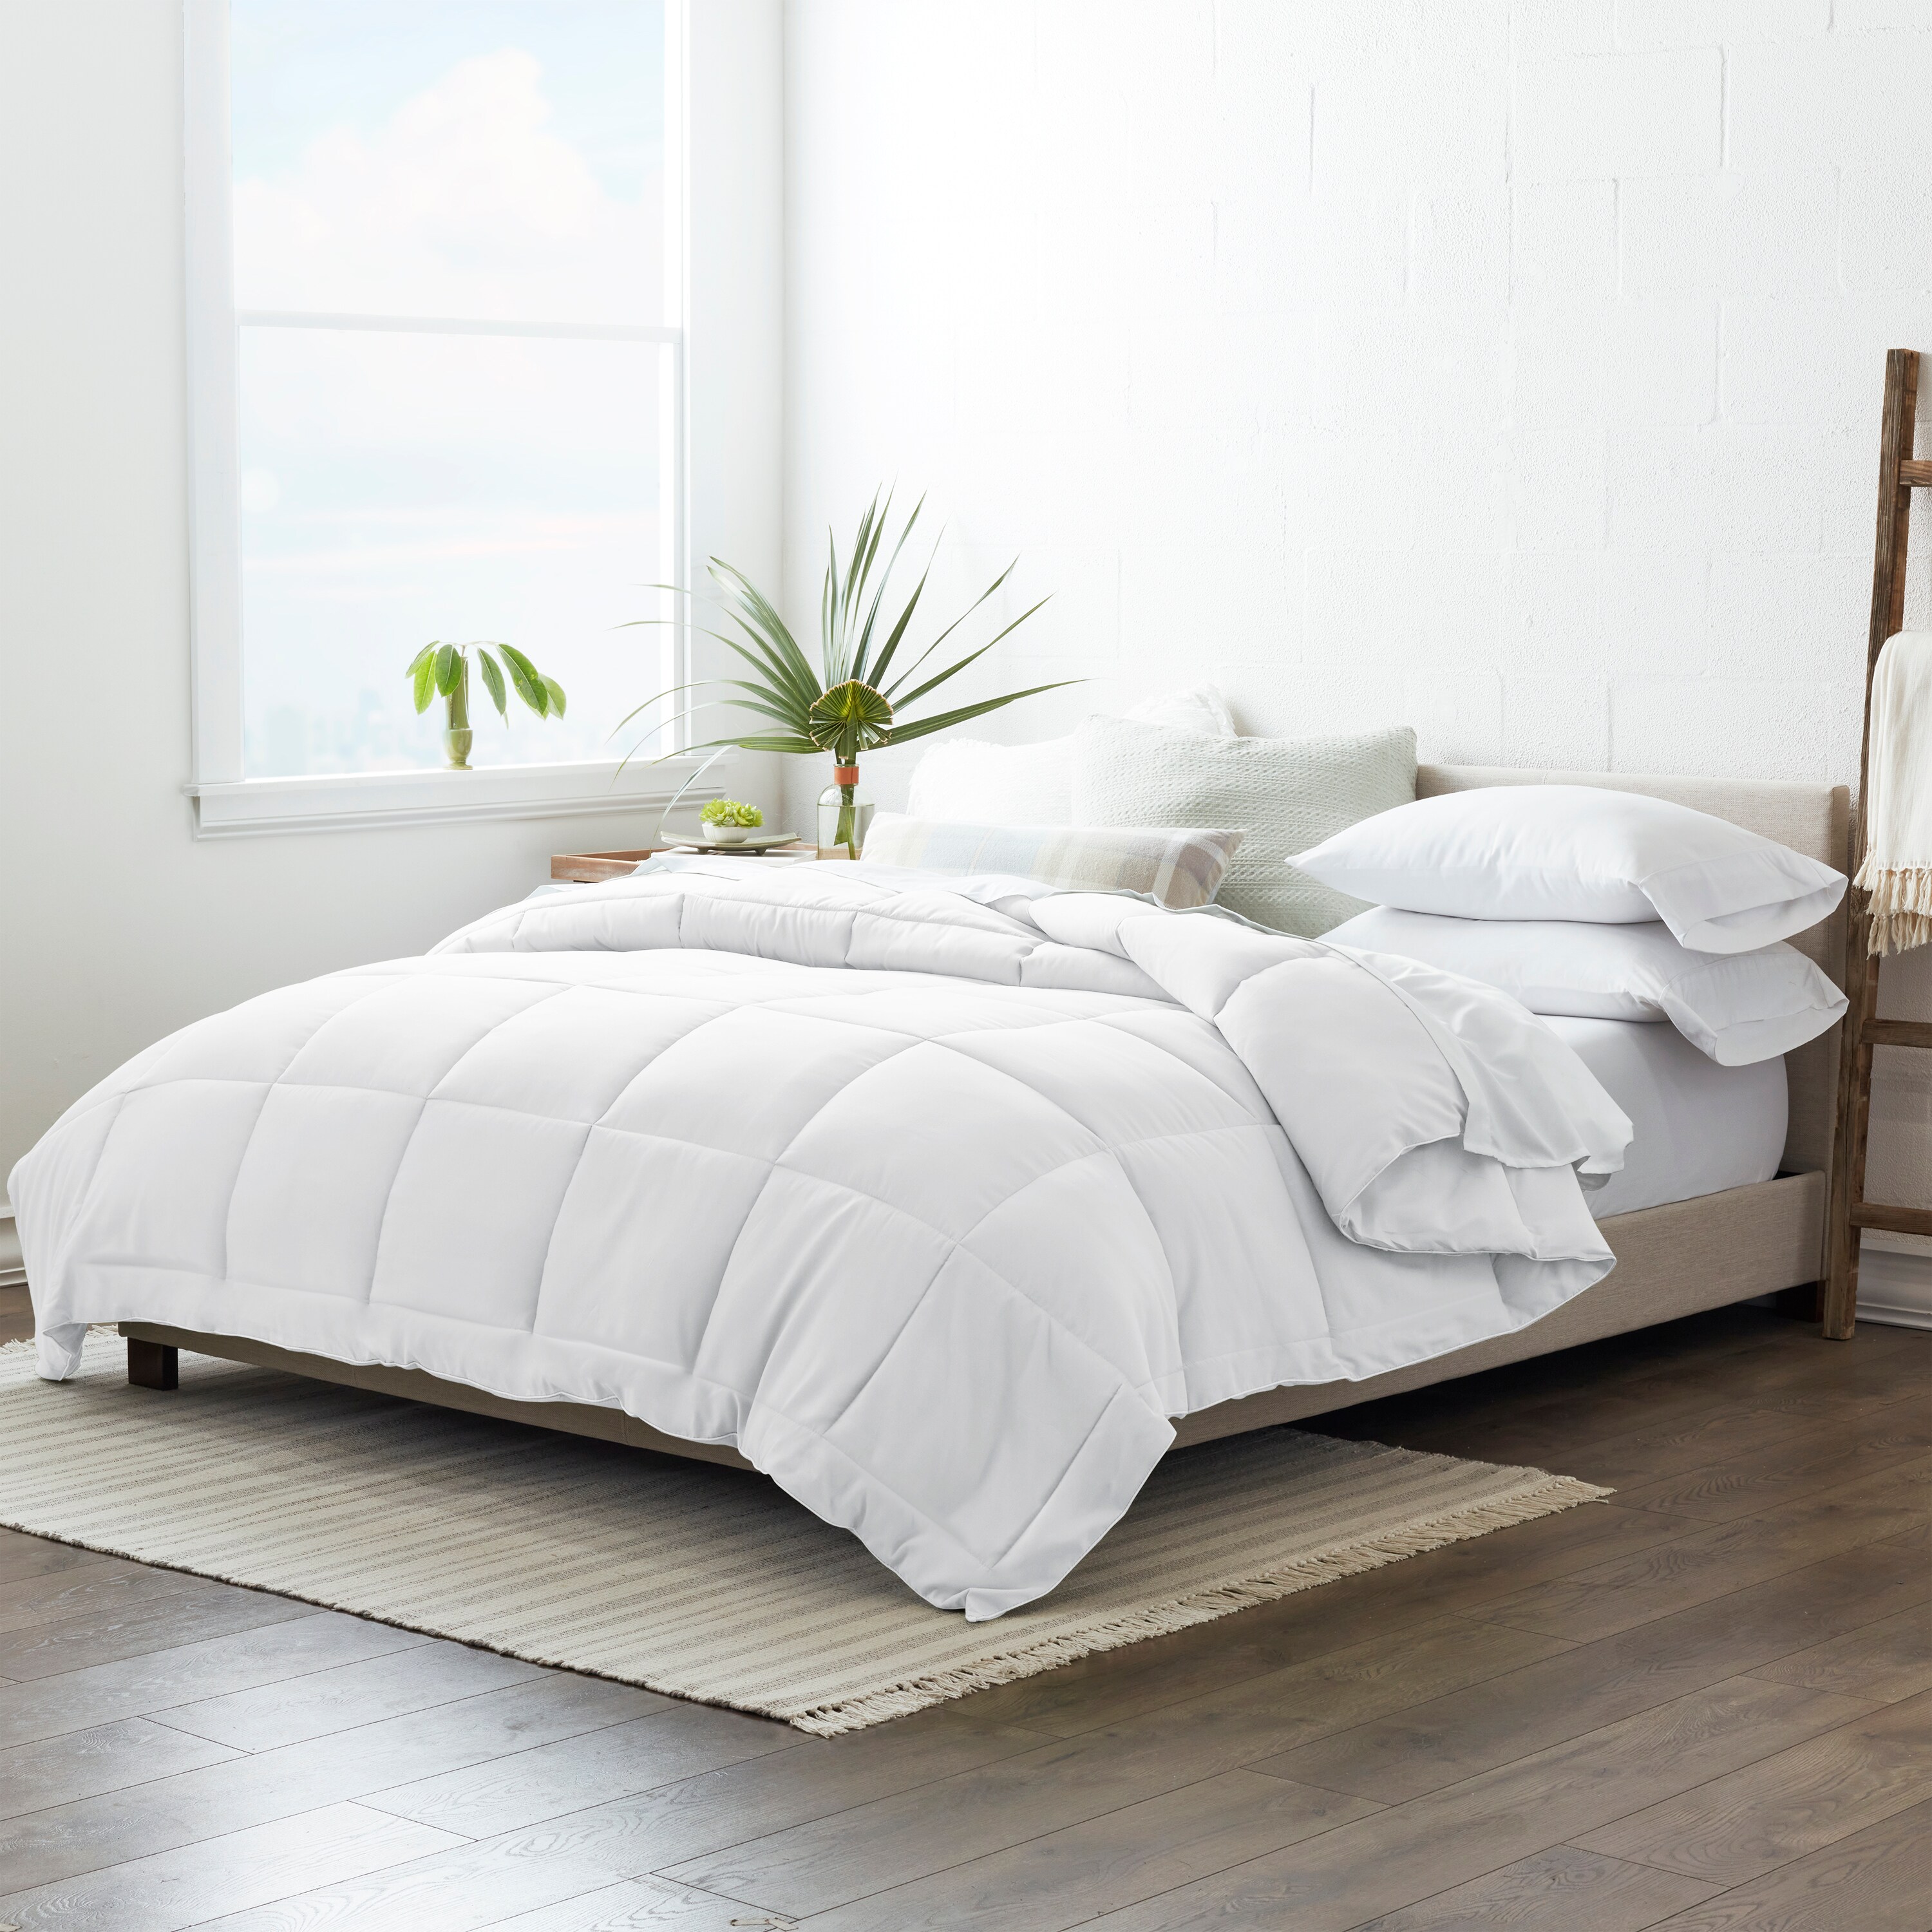 Ienjoy Home Home White Solid King/California King Comforter 